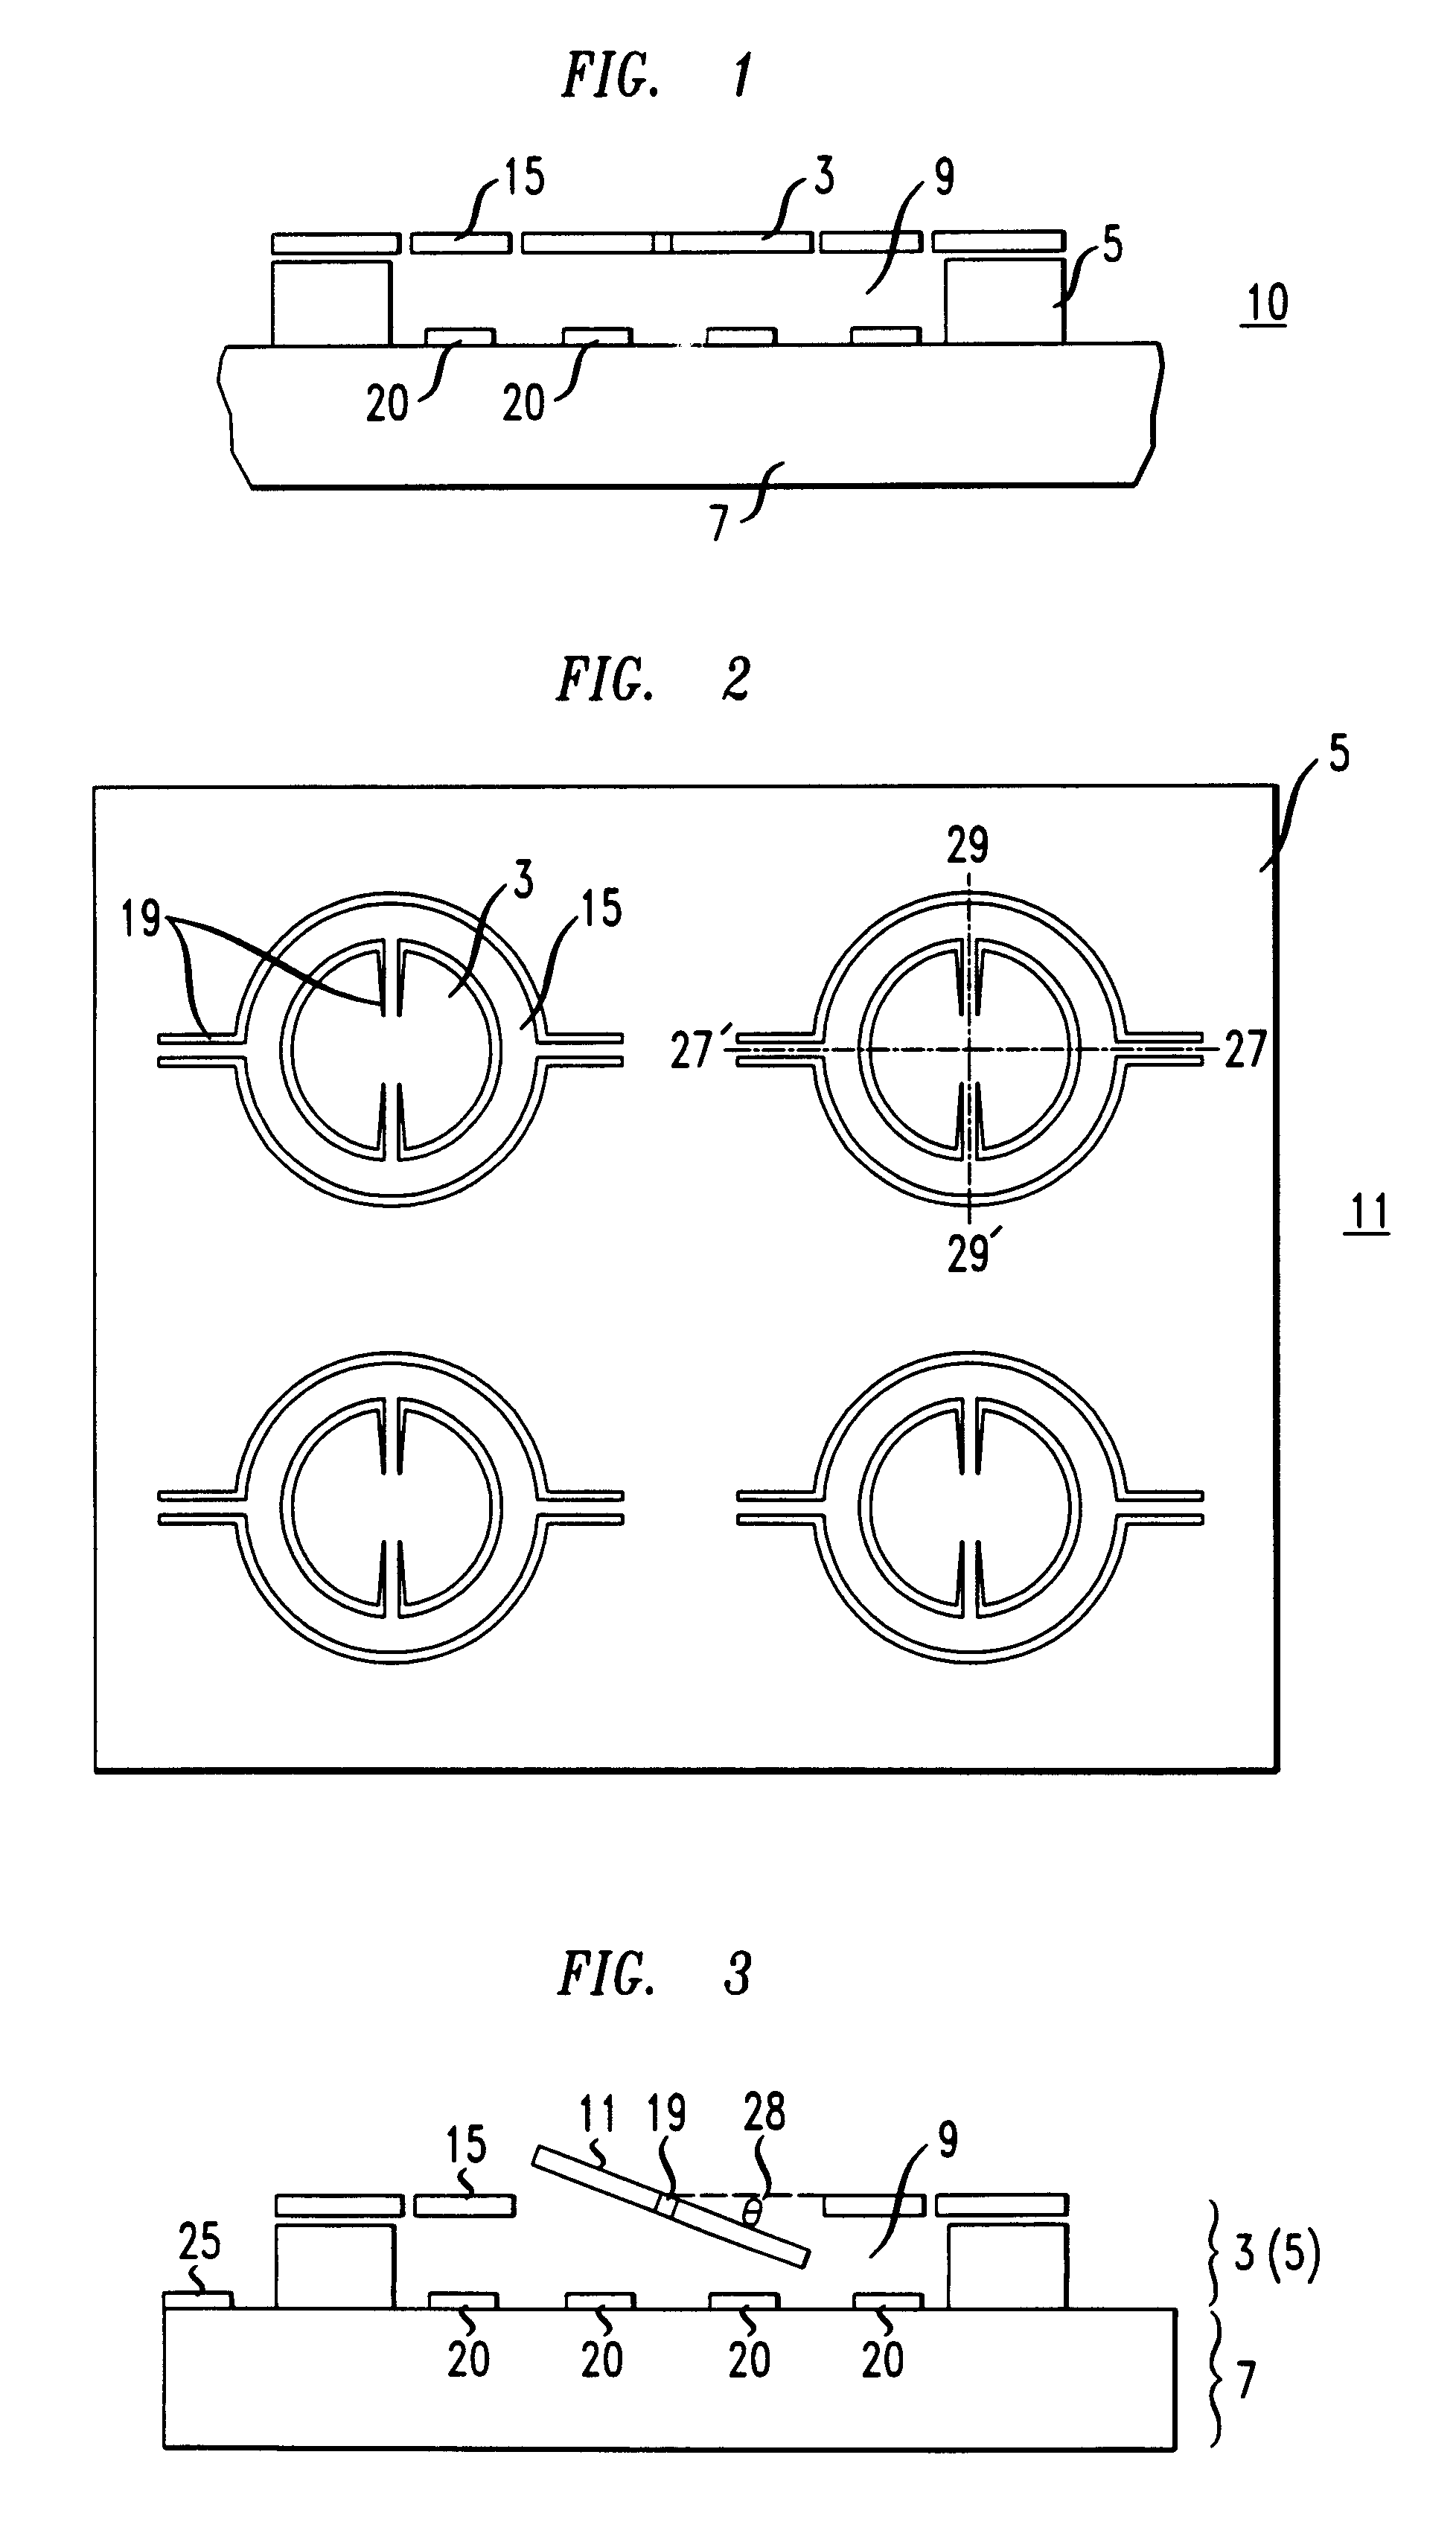 Process for fabricating an optical mirror array